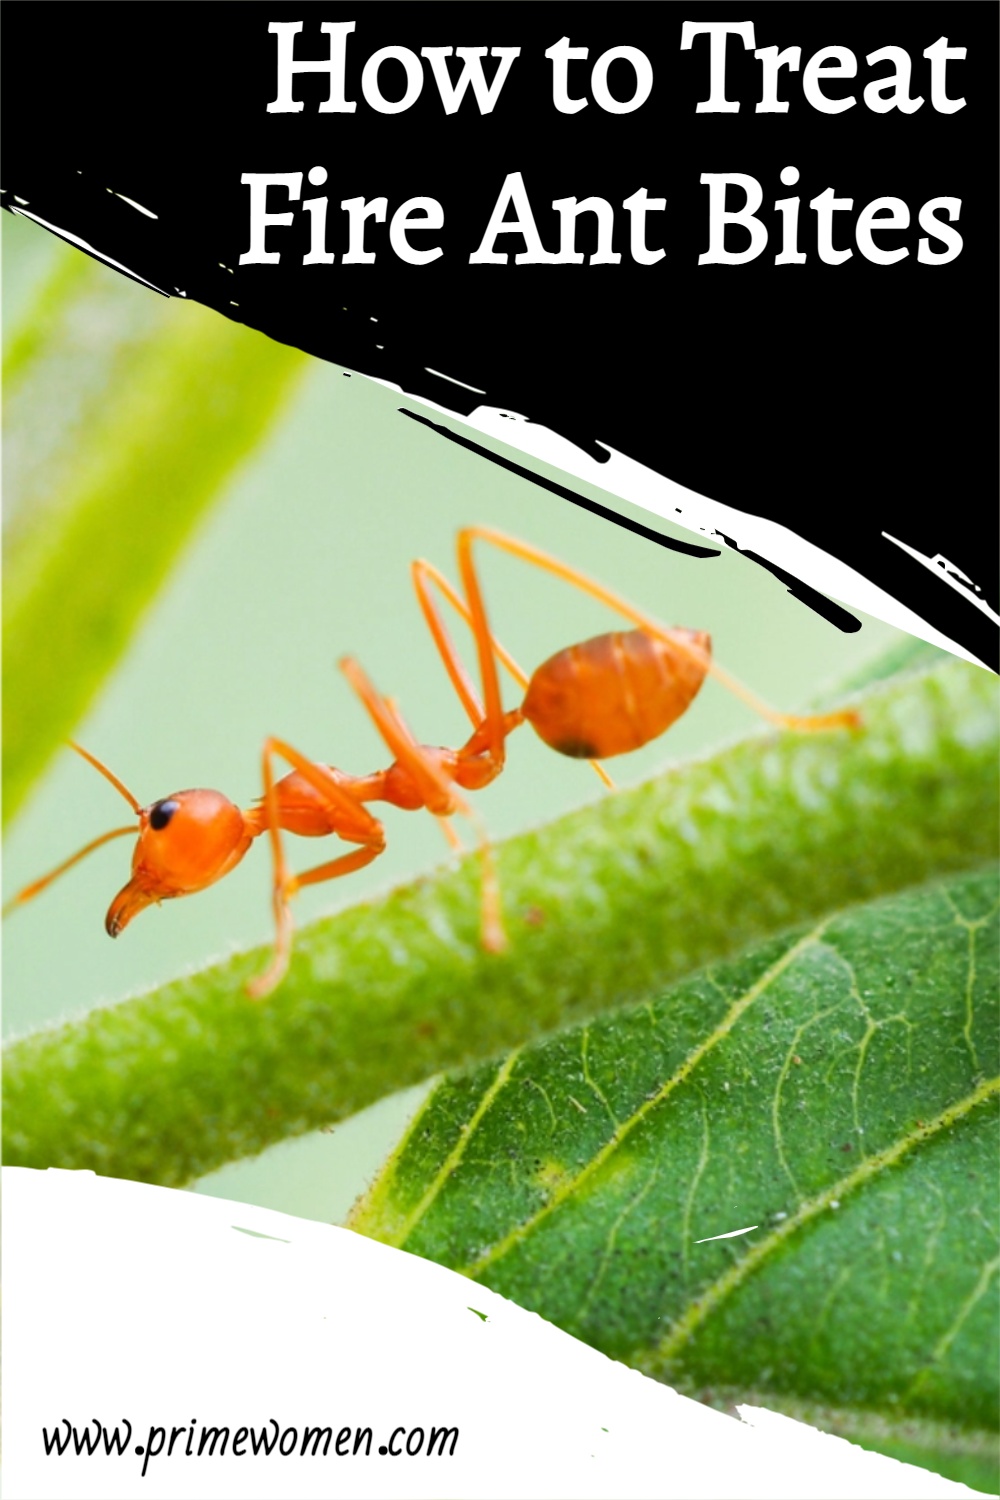 How-to-Treat-Fire-Ant-Bites